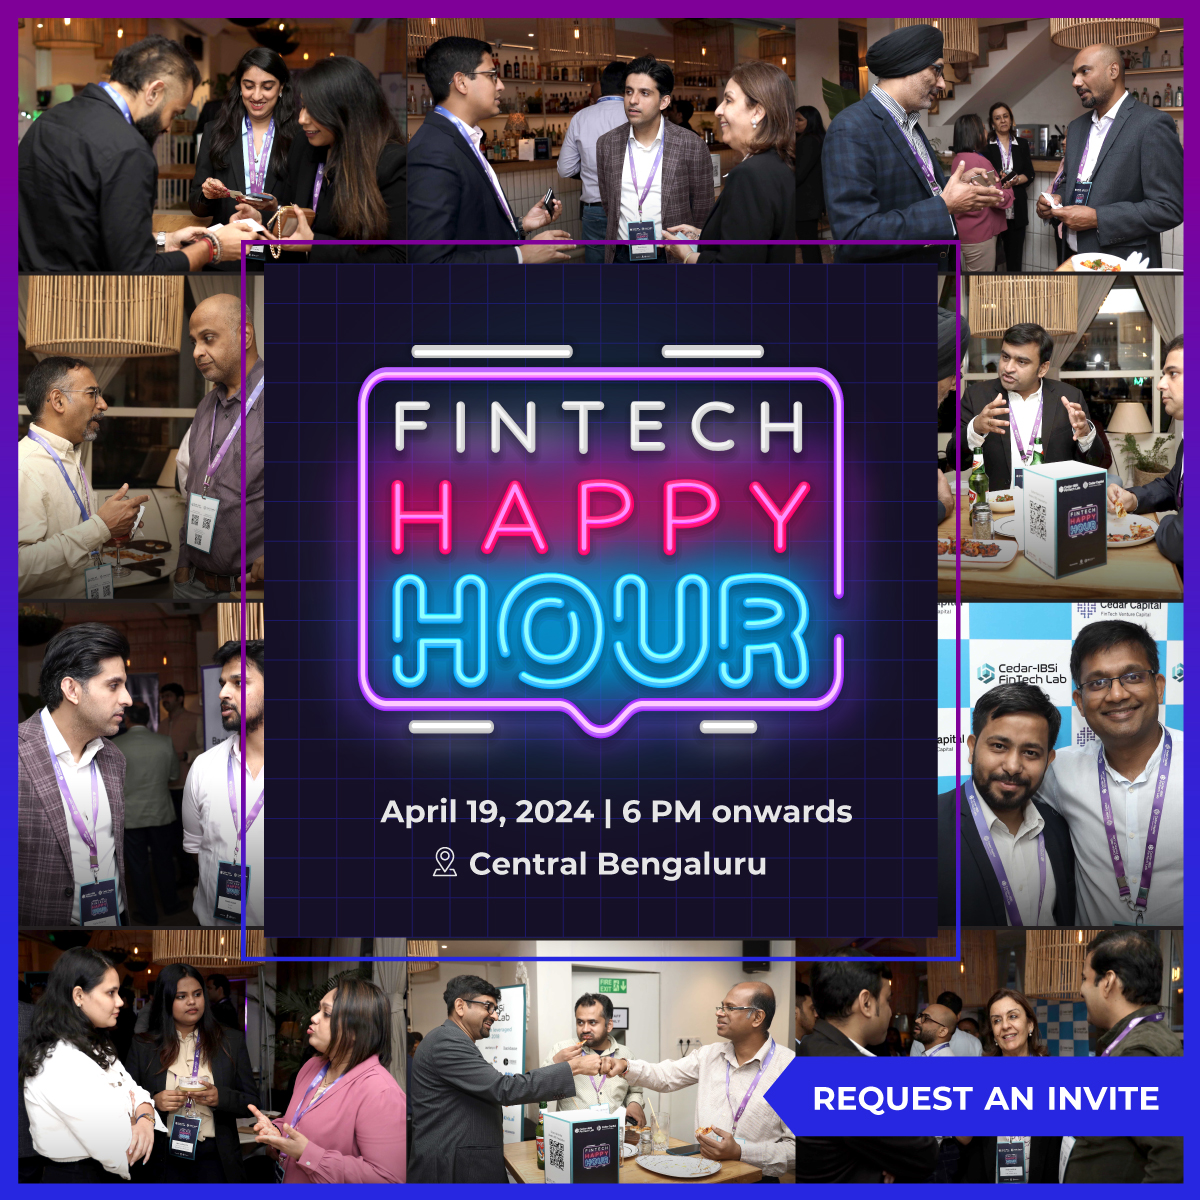 #Bengaluru, gear up for Cedar-IBSI FinTech Happy Hour! 
Get access to: 
🤝 VC insights 🧠 BankTech strategies 🔗 Industry connections 🌐 FinTech partnerships

🗓️ Apr 19, 2024 | 🕕 6 PM | 📍 Central Bengaluru
Register: lnkd.in/dxxeyWst